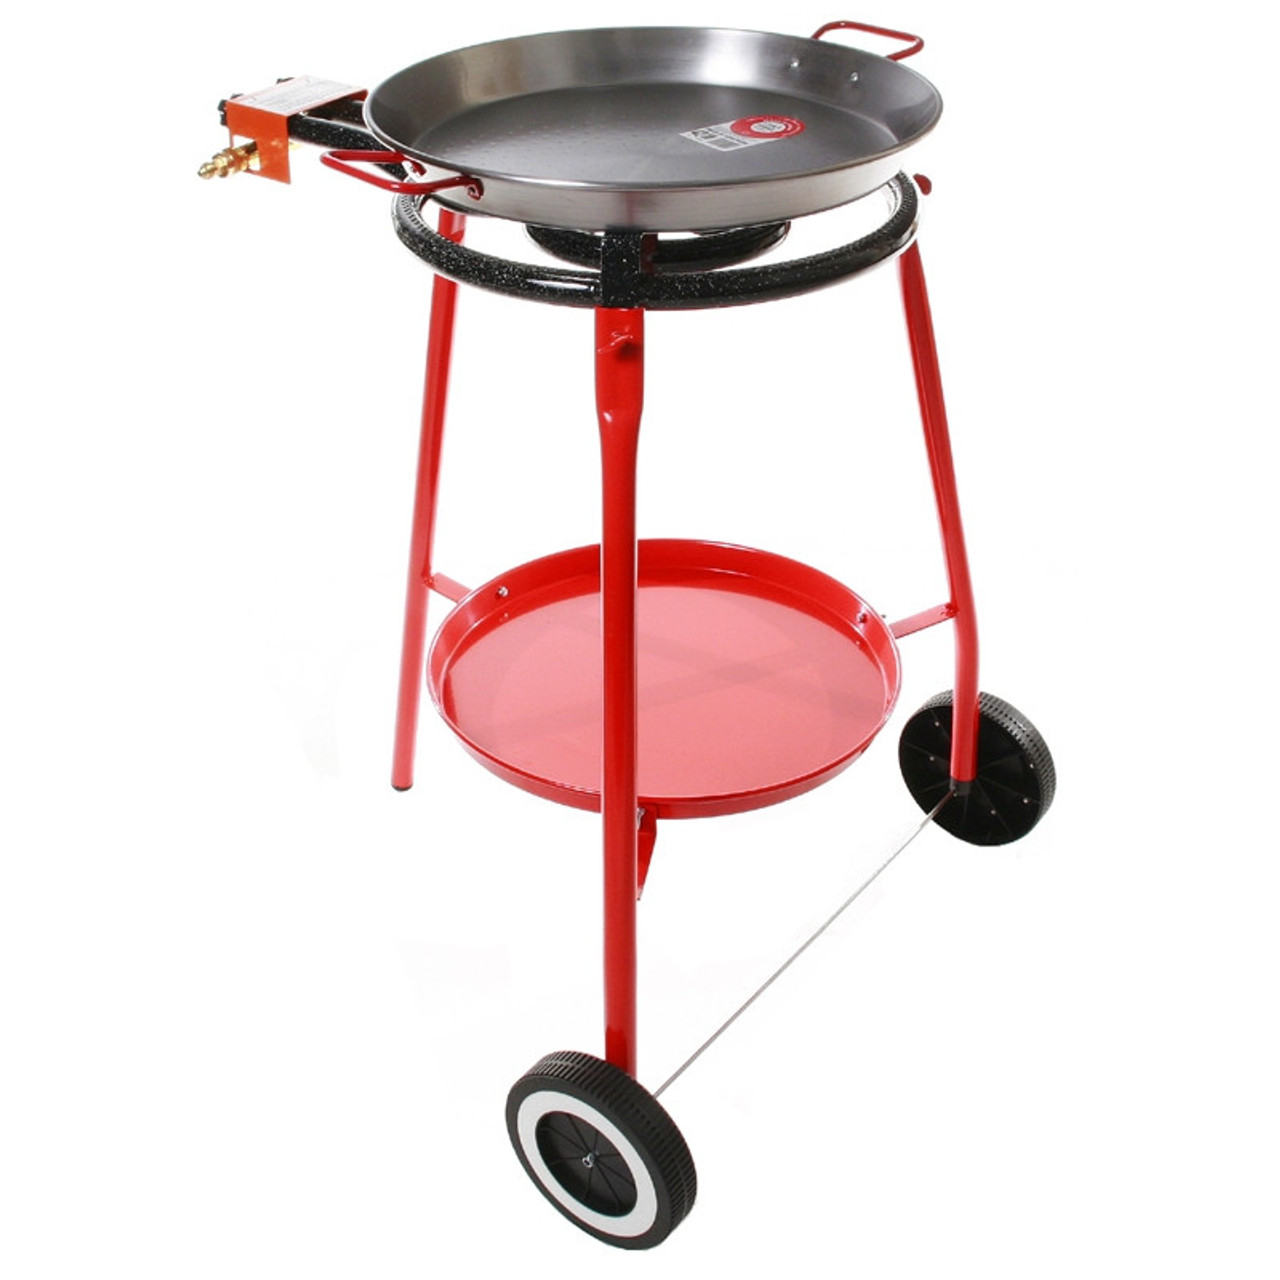 Shop Small Forged Steel Paella Tripod Online